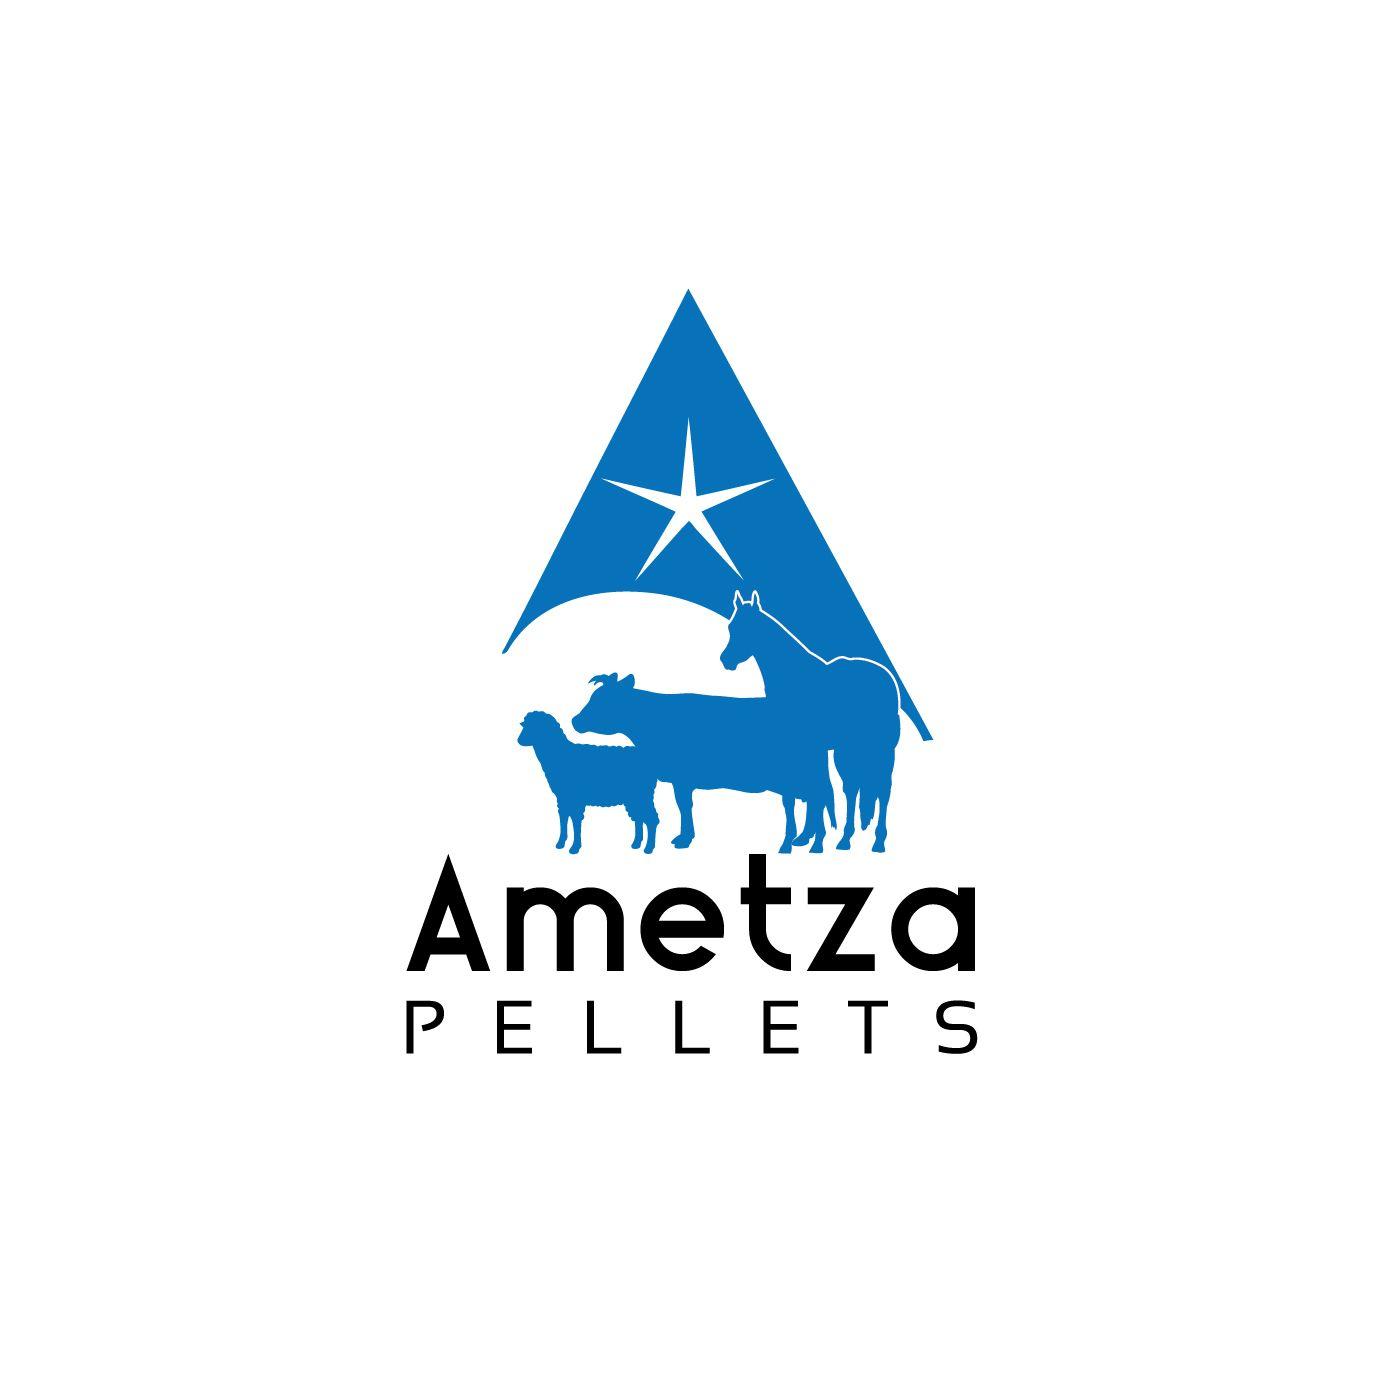 Animal Feed Logo - Modern, Conservative, It Company Logo Design for Ametza Pellets by ...